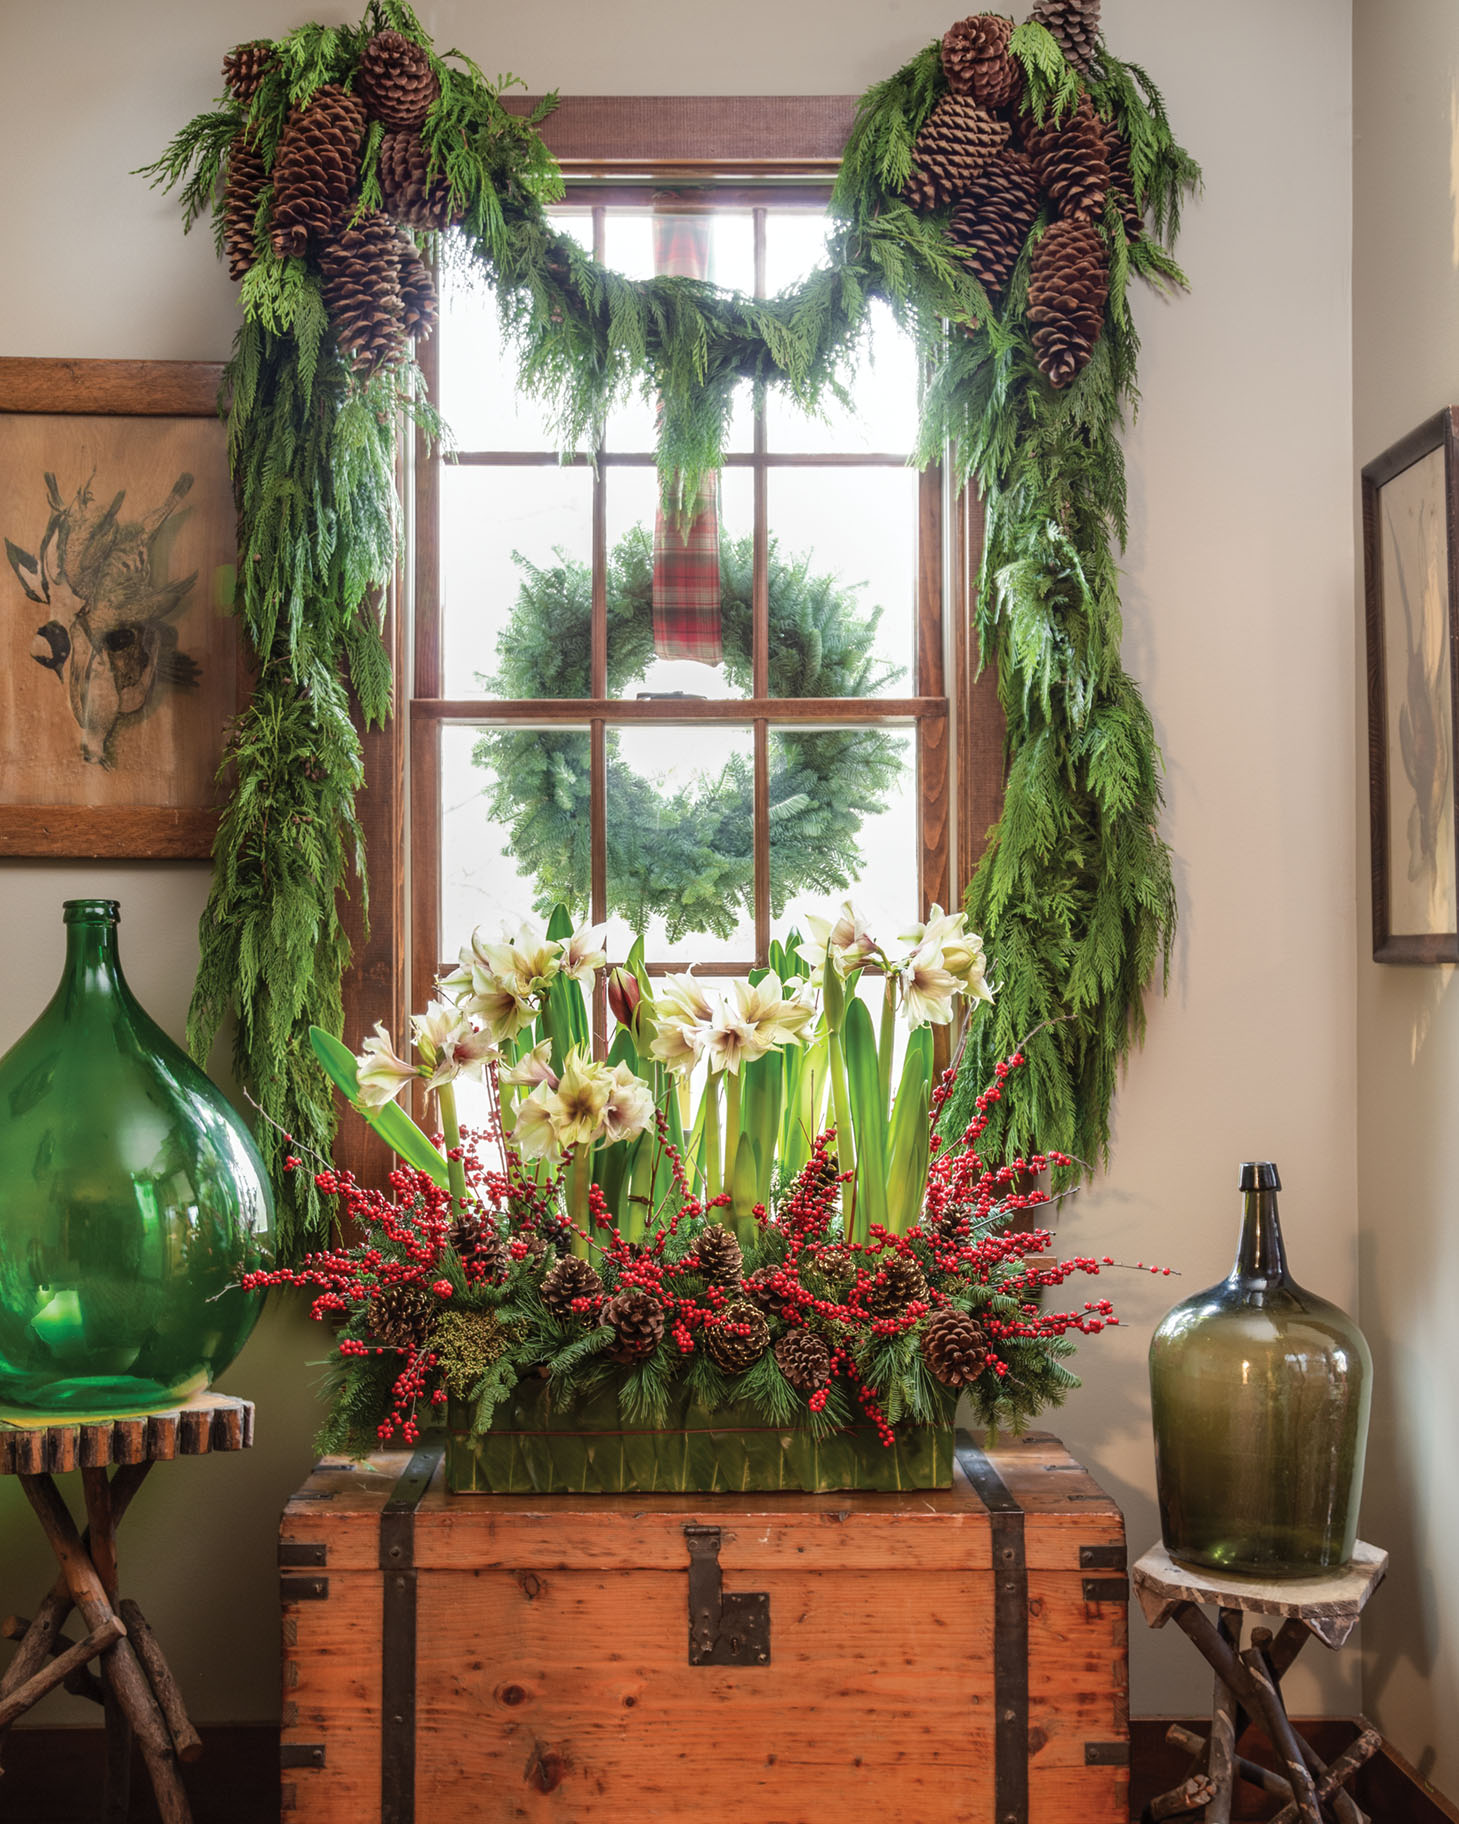 The chest sits under a natural-wood mullioned window. Decorating with antiques and choosing such architectural details are how event planners Rick Davis and Christopher Vazquez made their new country home look like an old farmhouse in St. Mary’s County, Maryland.